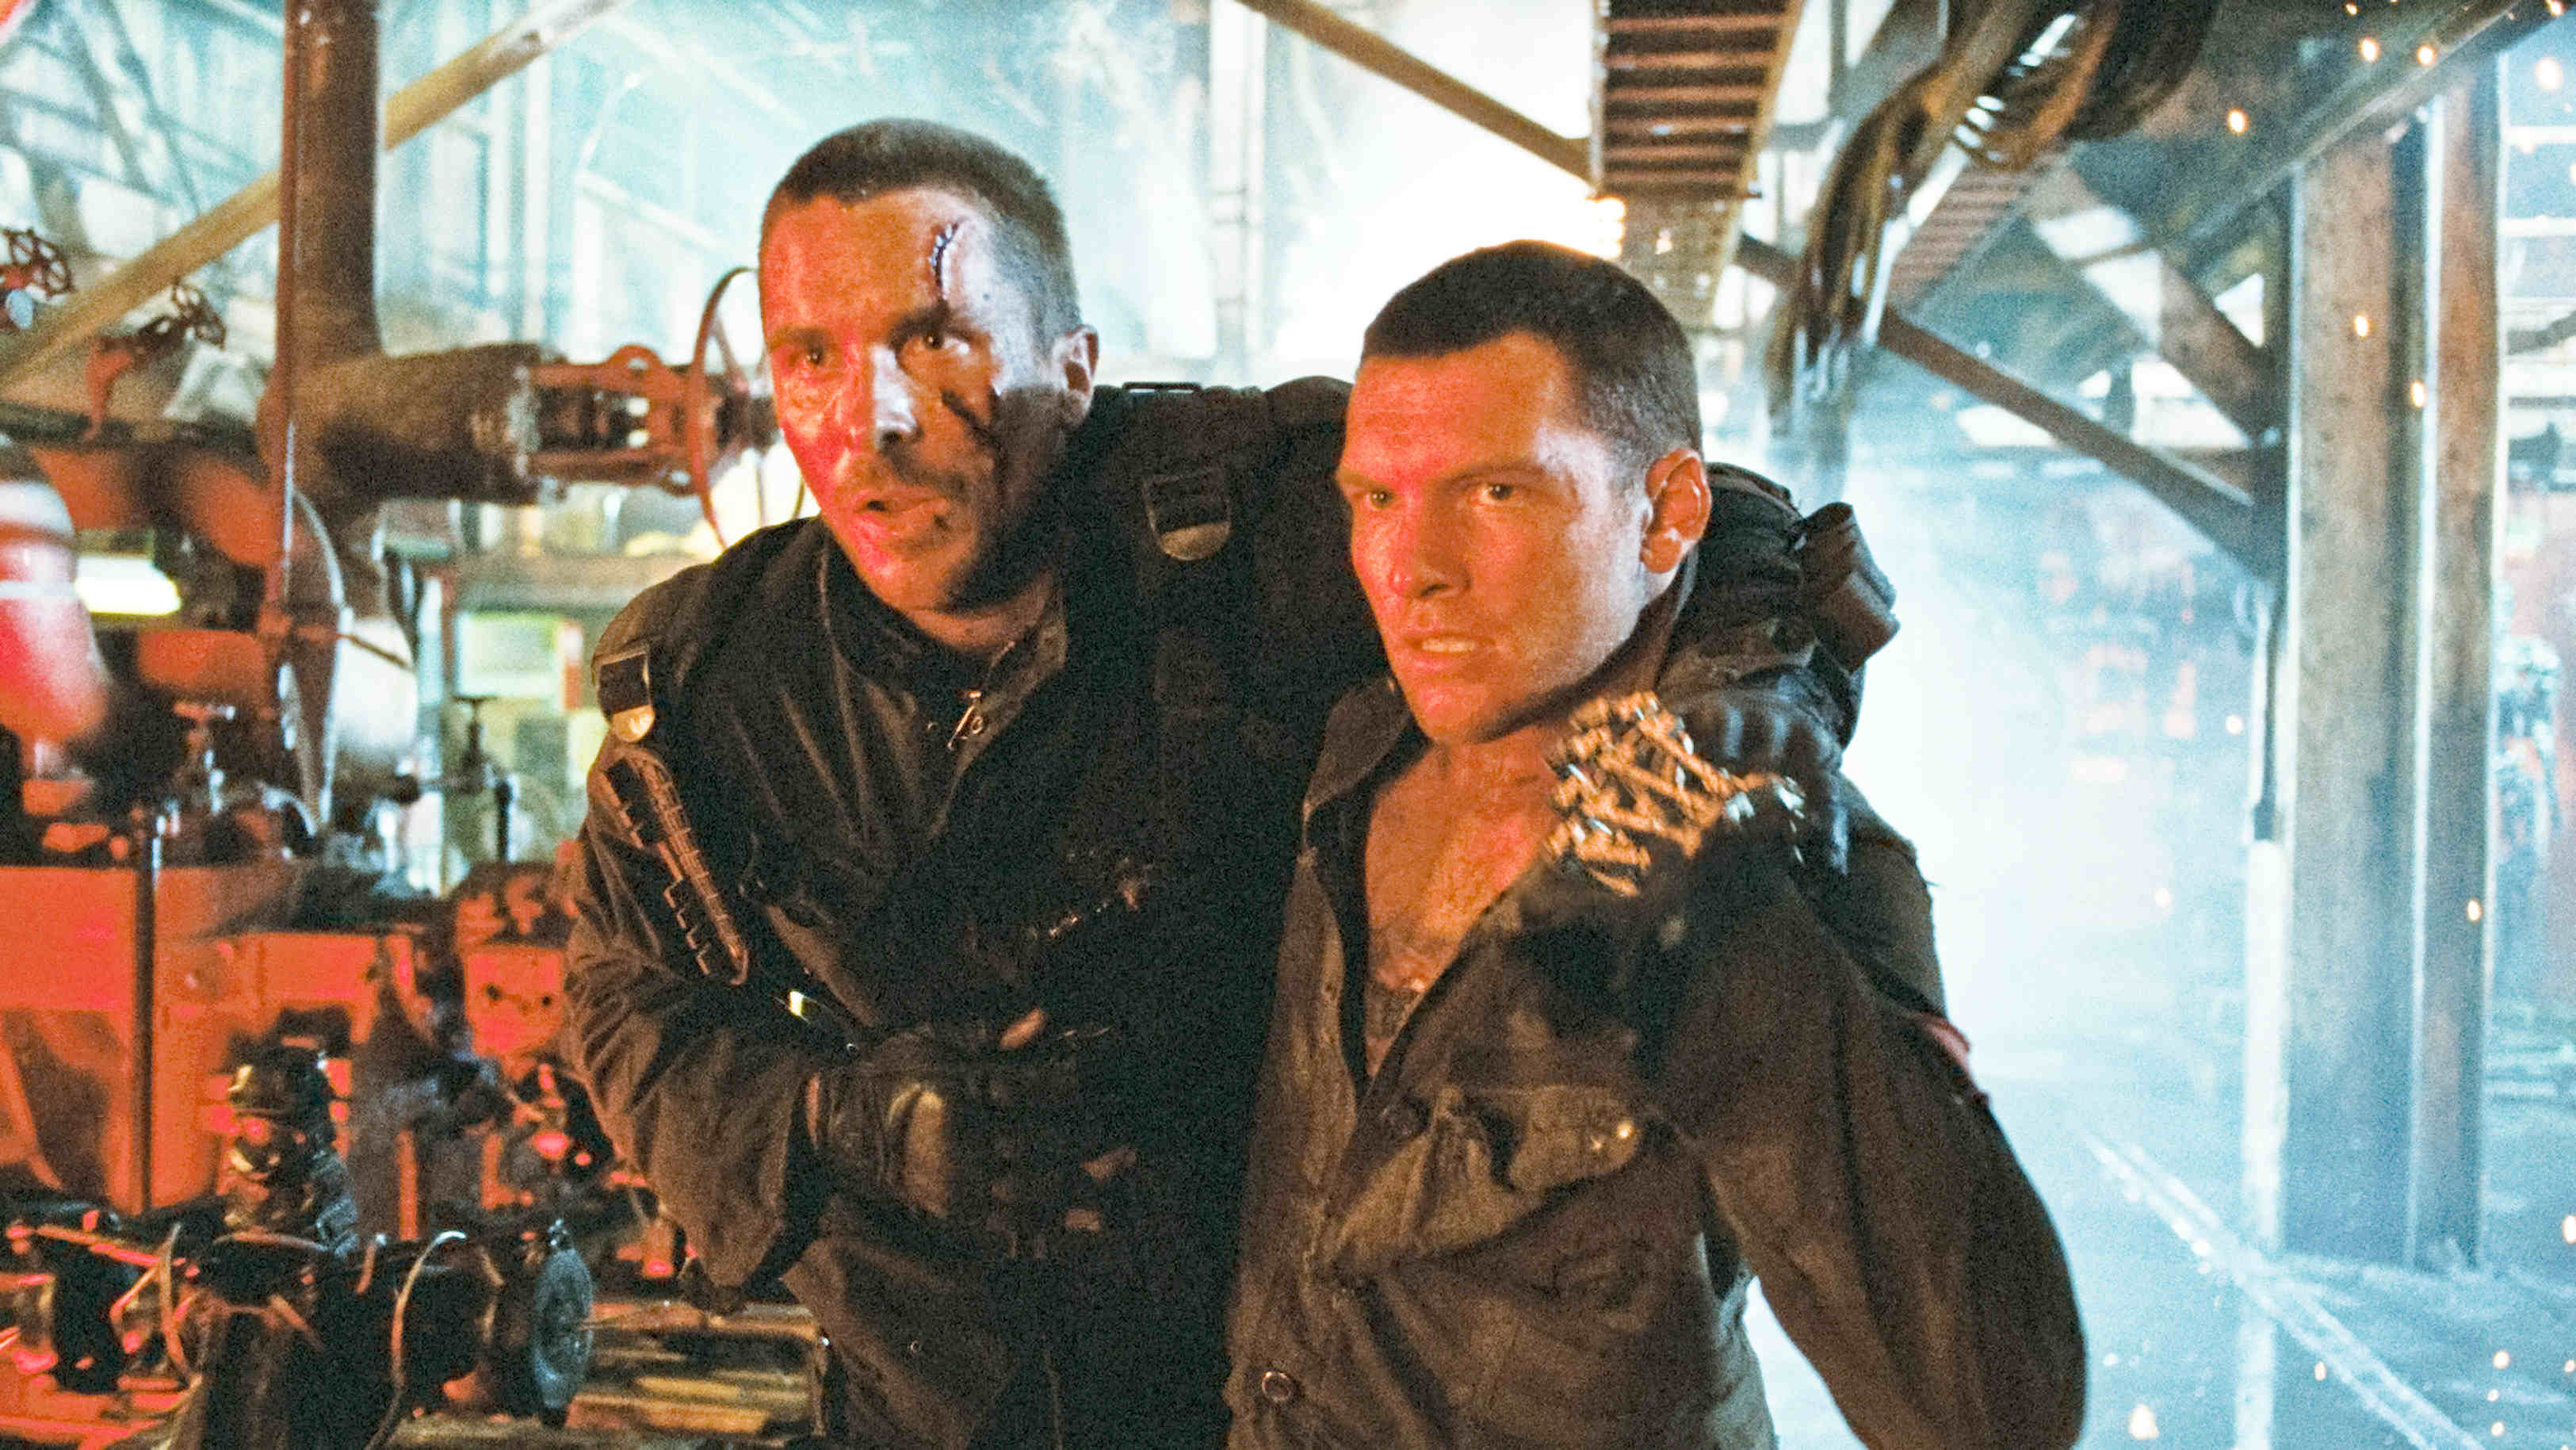 Christian Bale stars as John Connor and Sam Worthington stars as Marcus Wright in Warner Bros. Pictures' Terminator Salvation (2009)